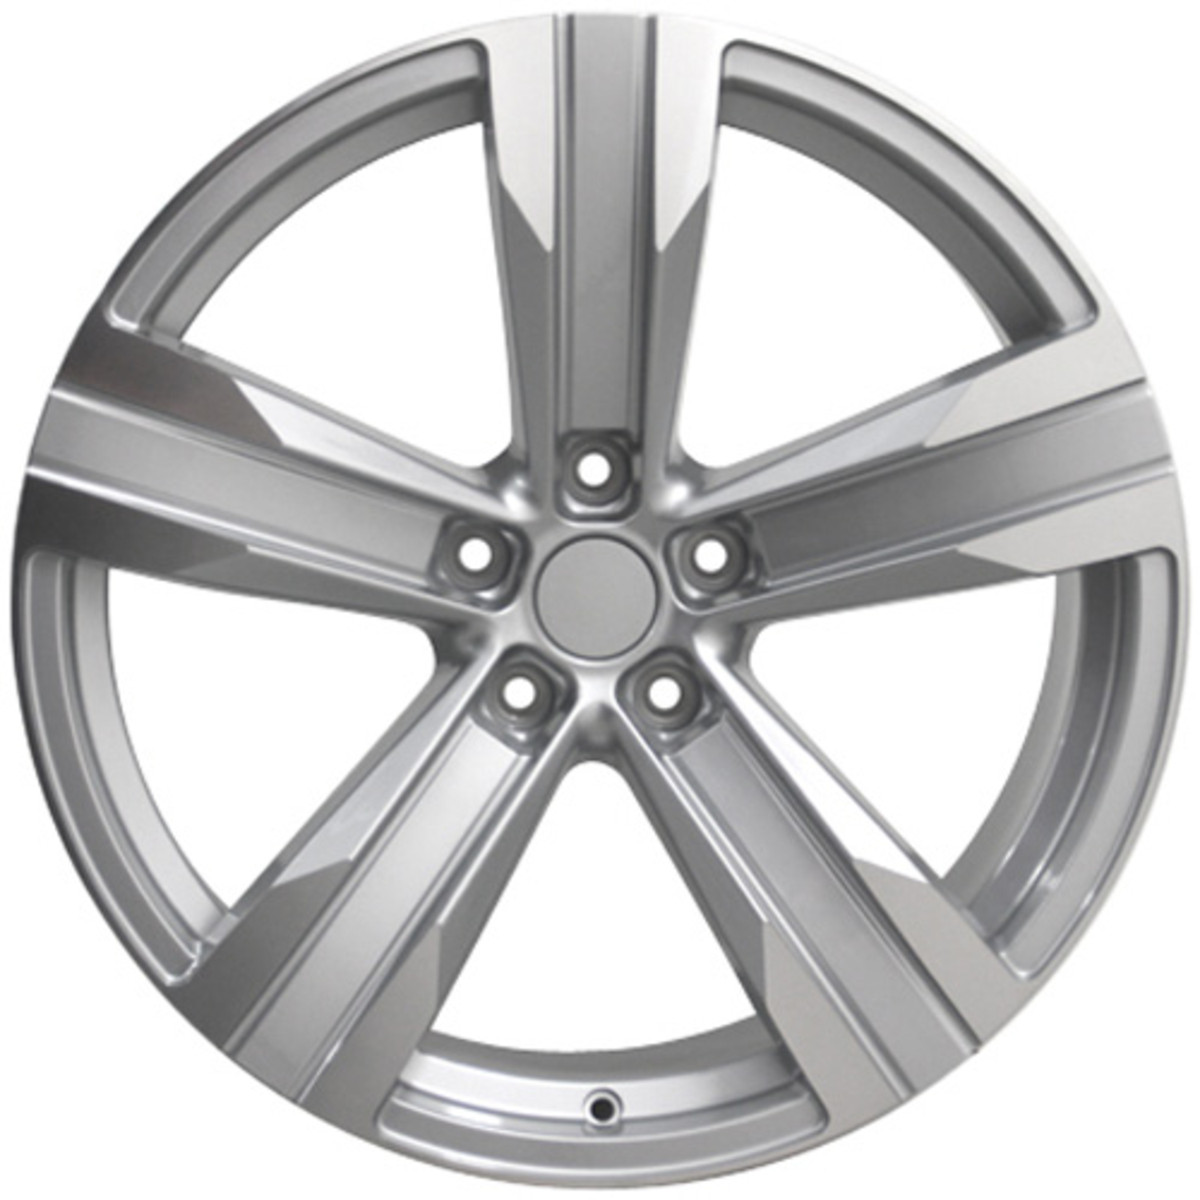 2010-2015 Camaro ZL1 Style Silver Finish Reproduction Wheels 20x9.5,  Each